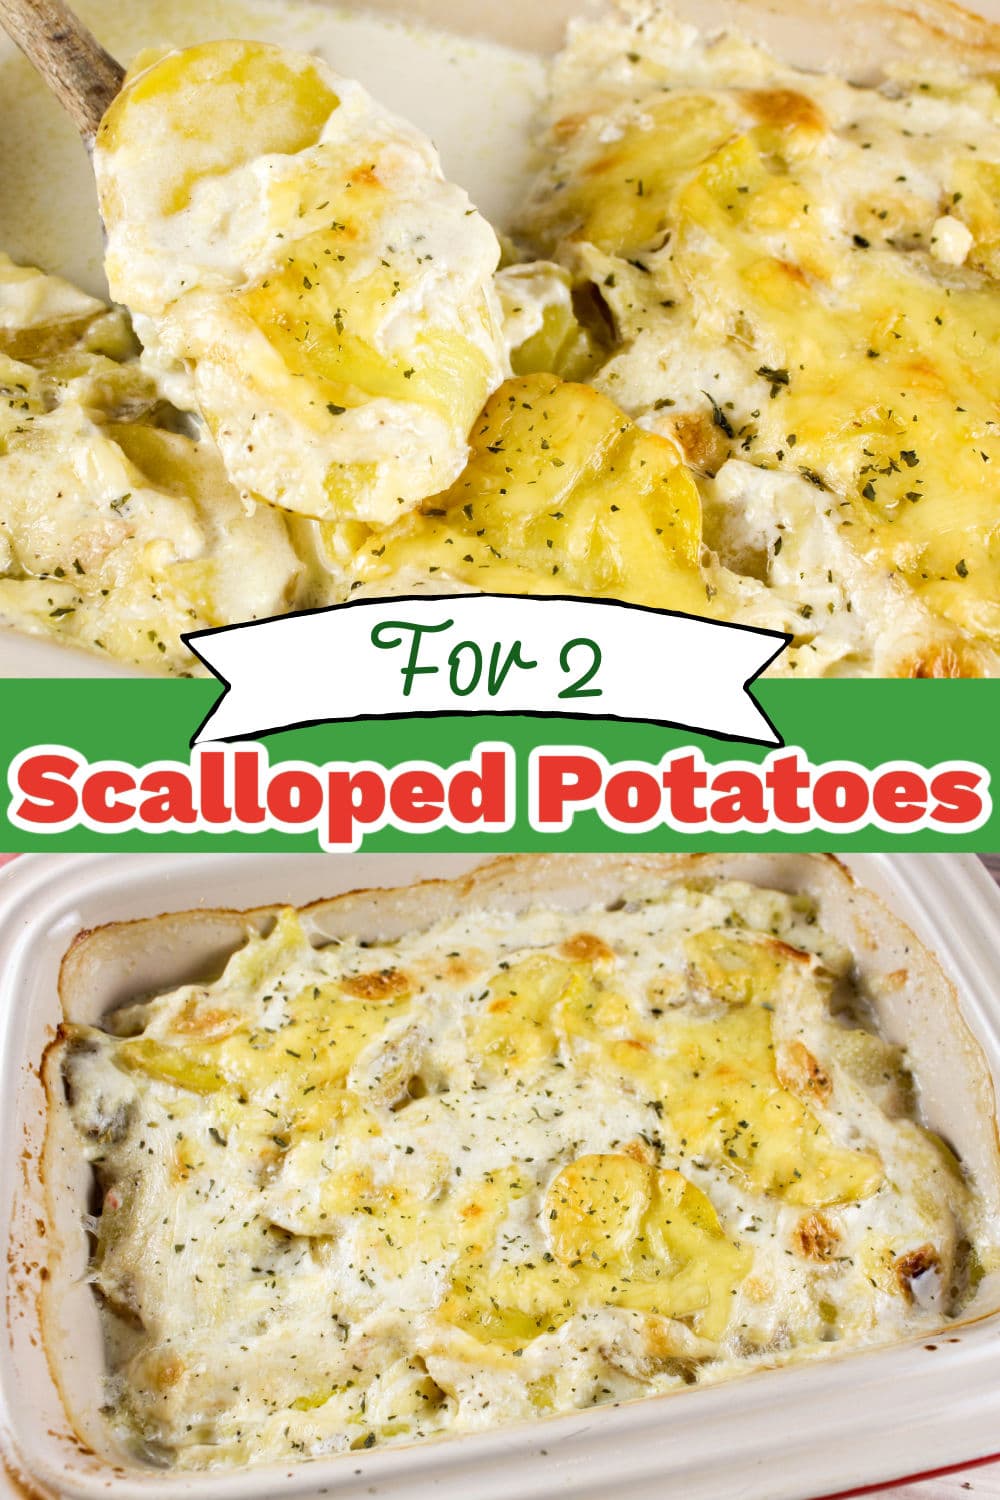 Scalloped Potatoes for Two - The Food Hussy